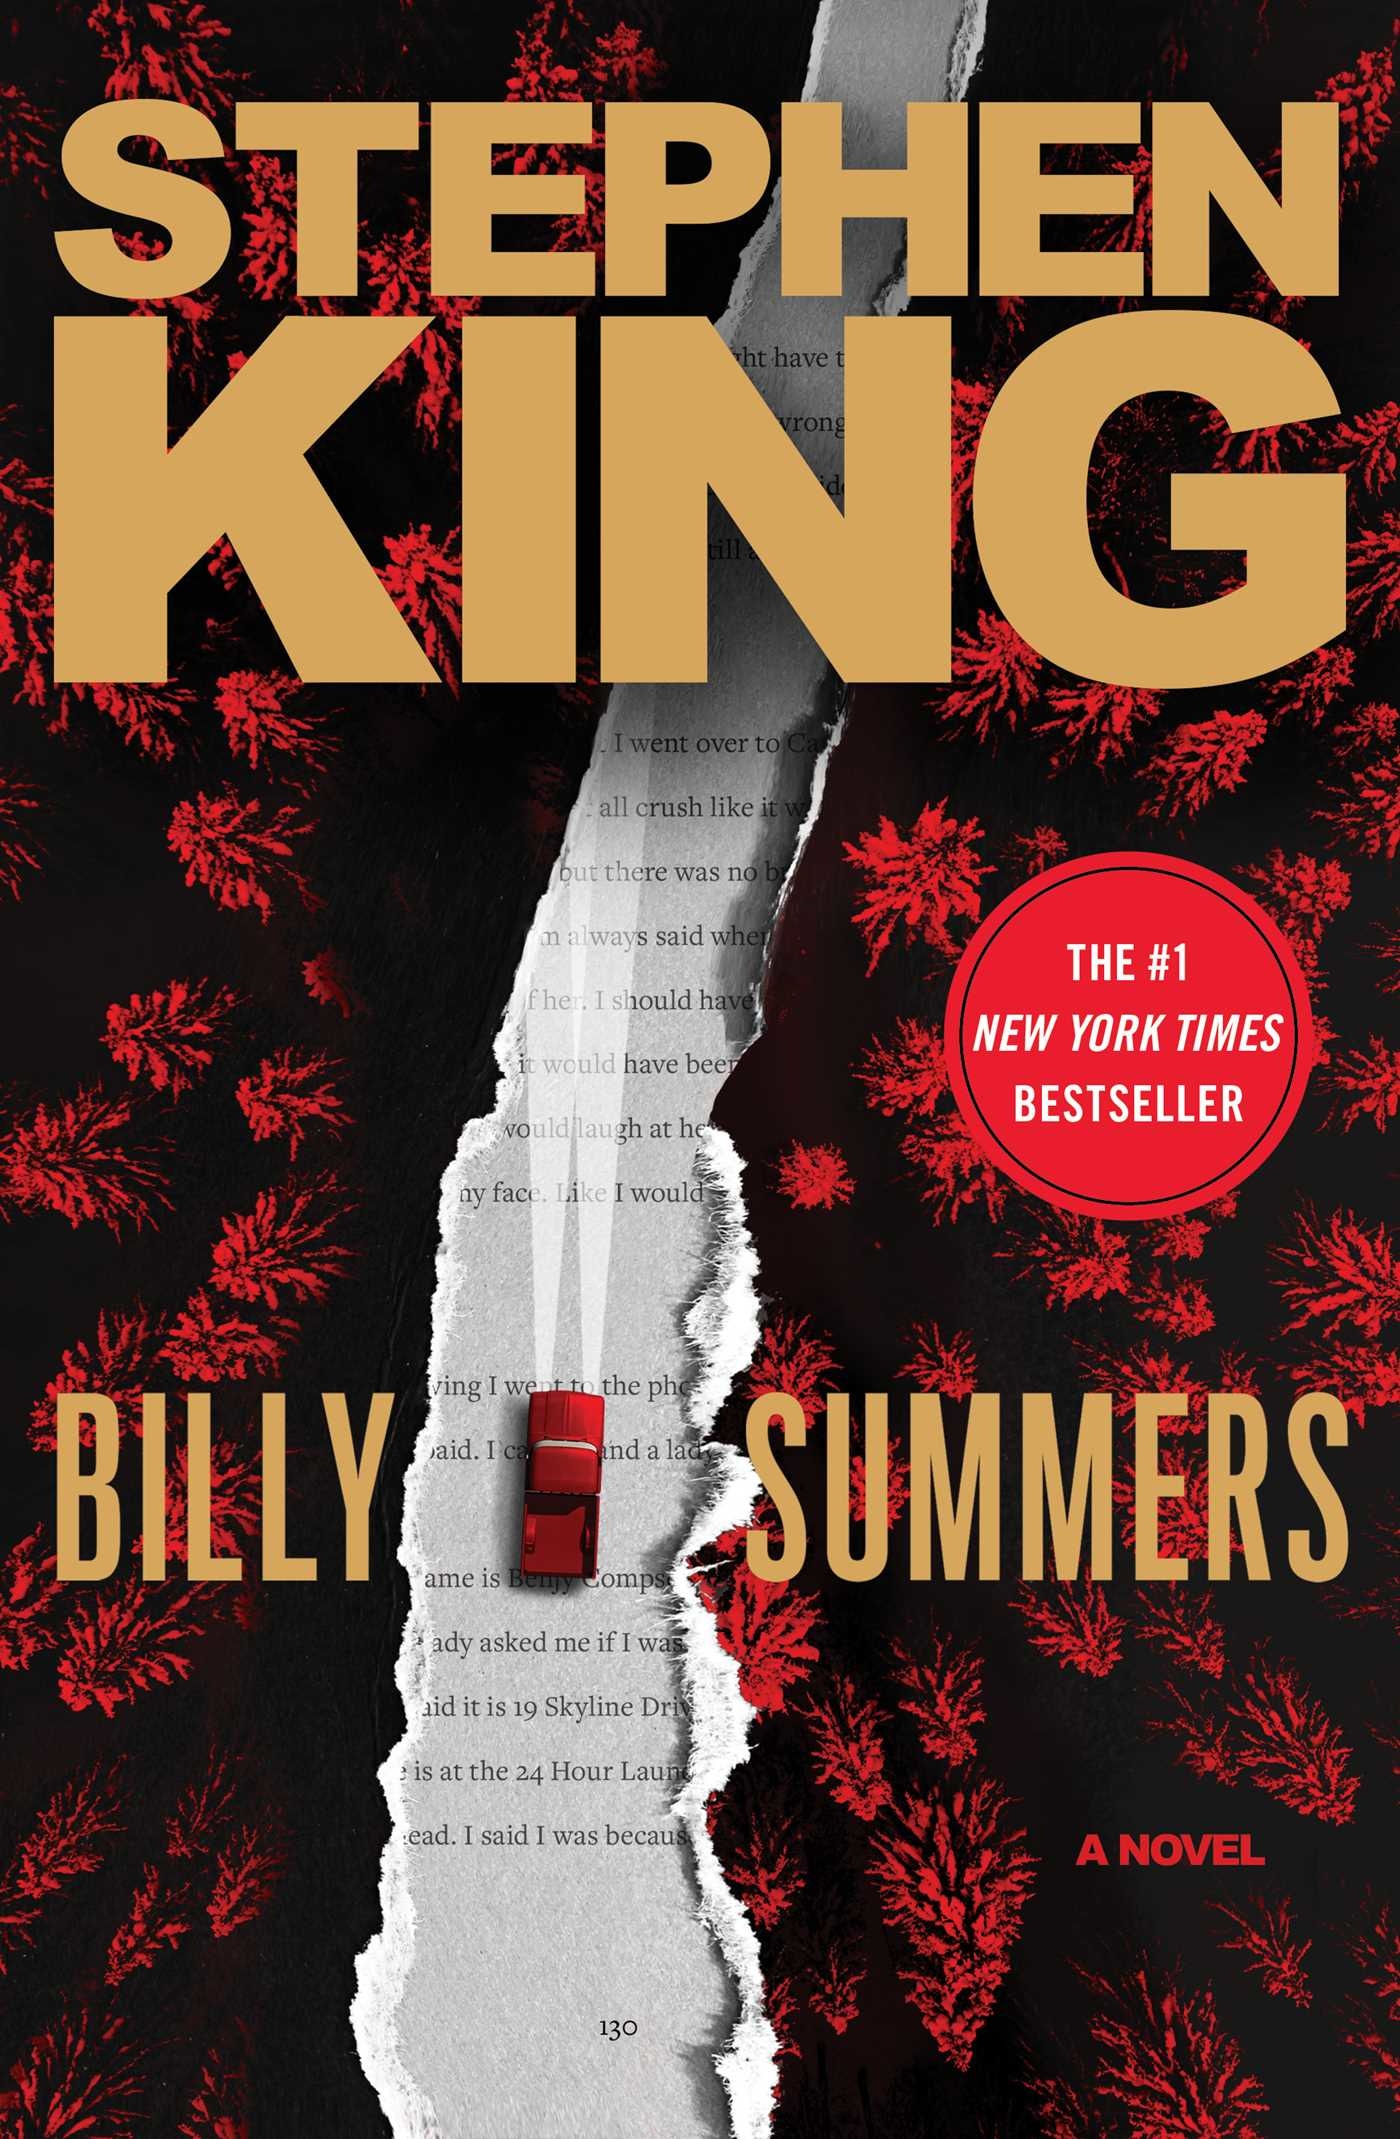 Book “Billy Summers” by Stephen King — August 3, 2021